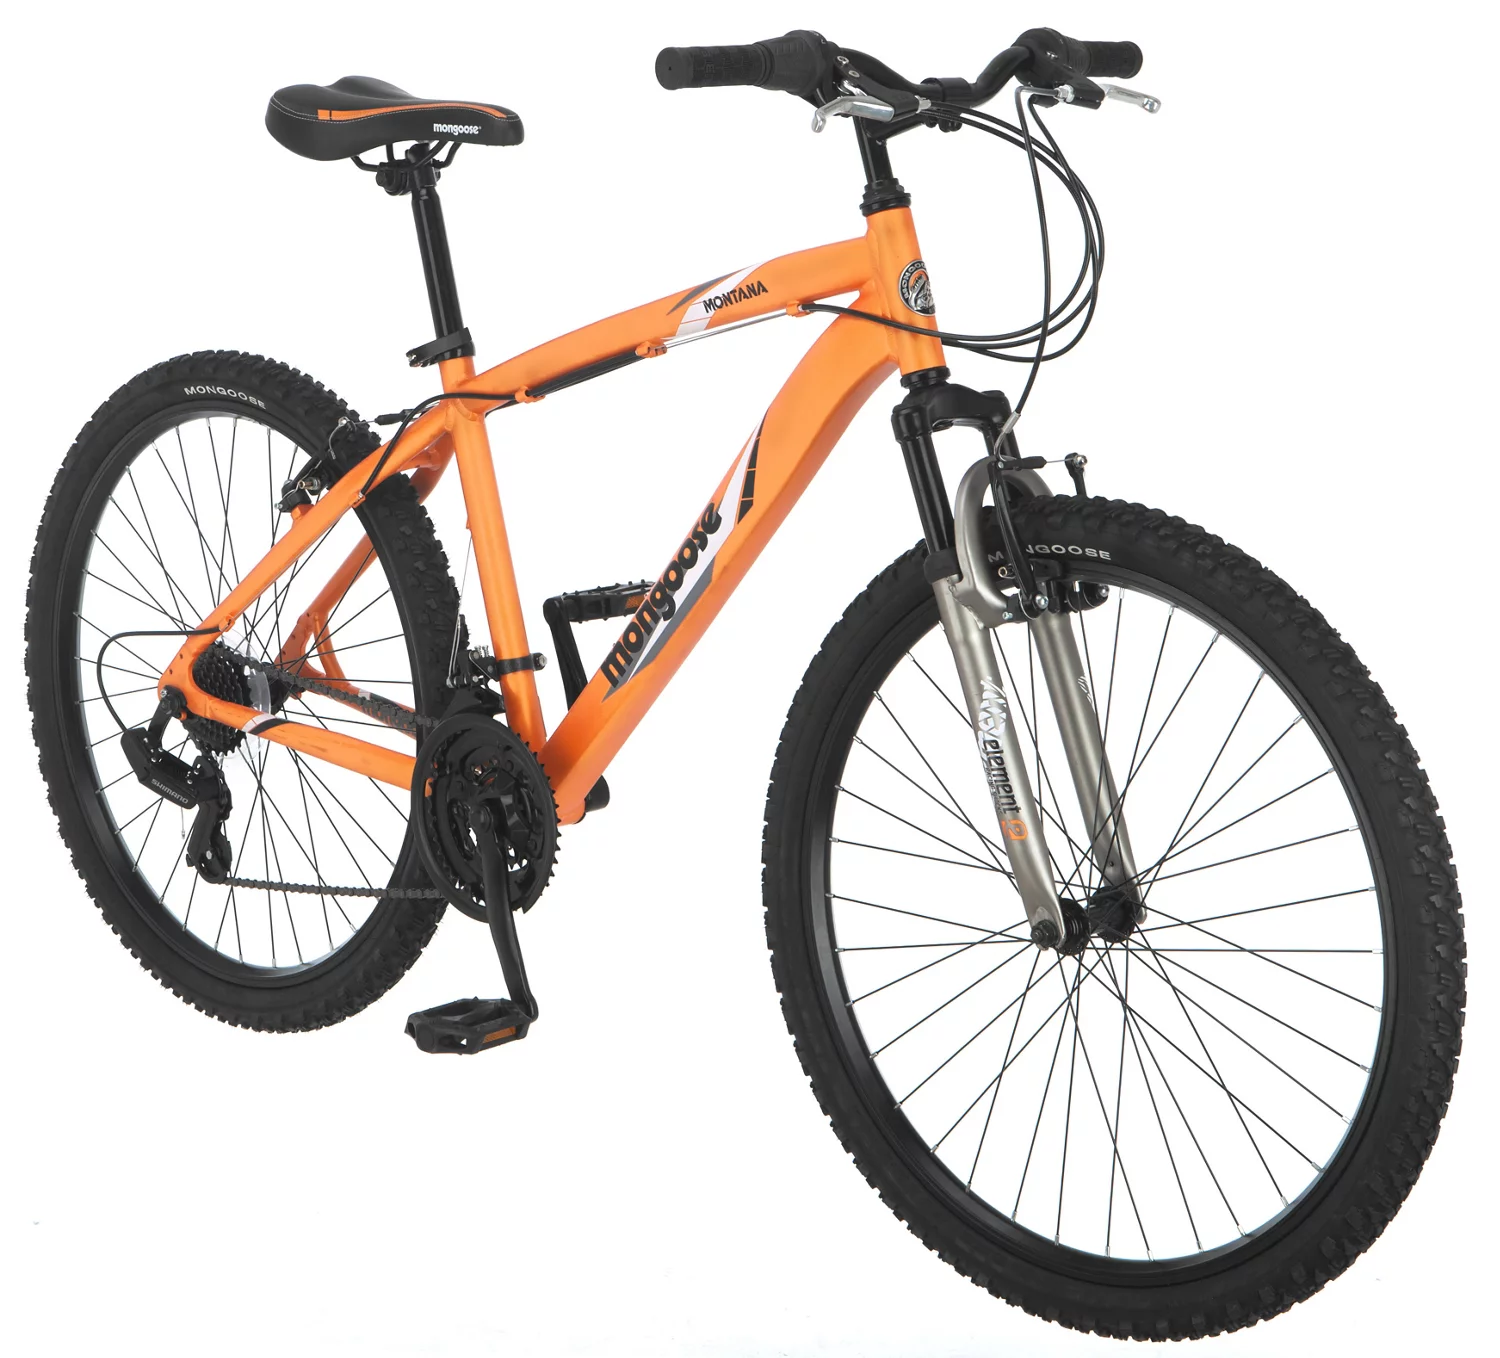 are mongoose mtbs good?